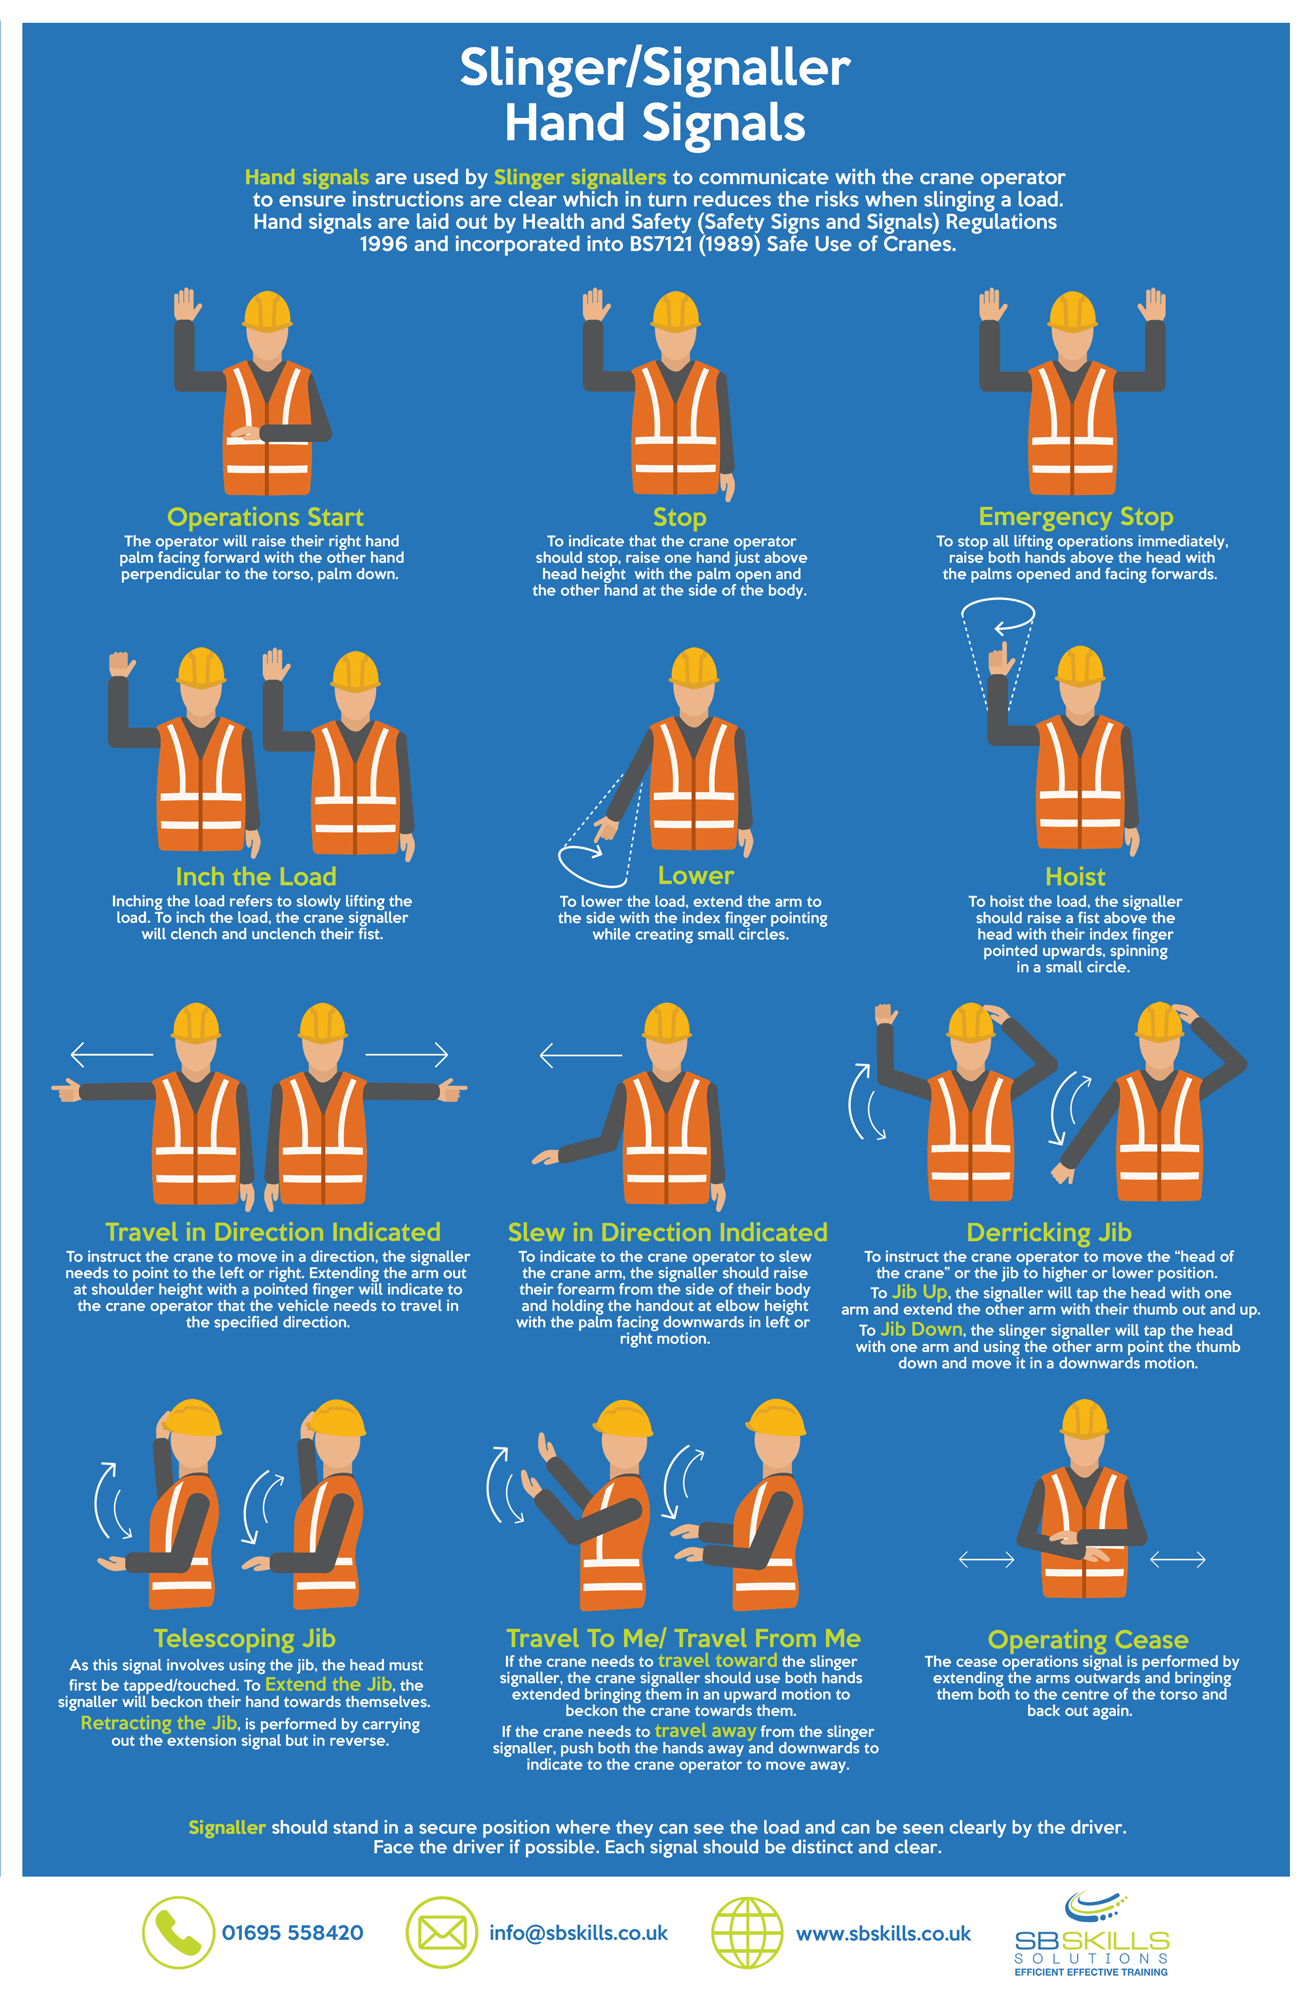 Slinger Signaller Hand Signals For Crane Operations Infographic by SB Skills Solutions